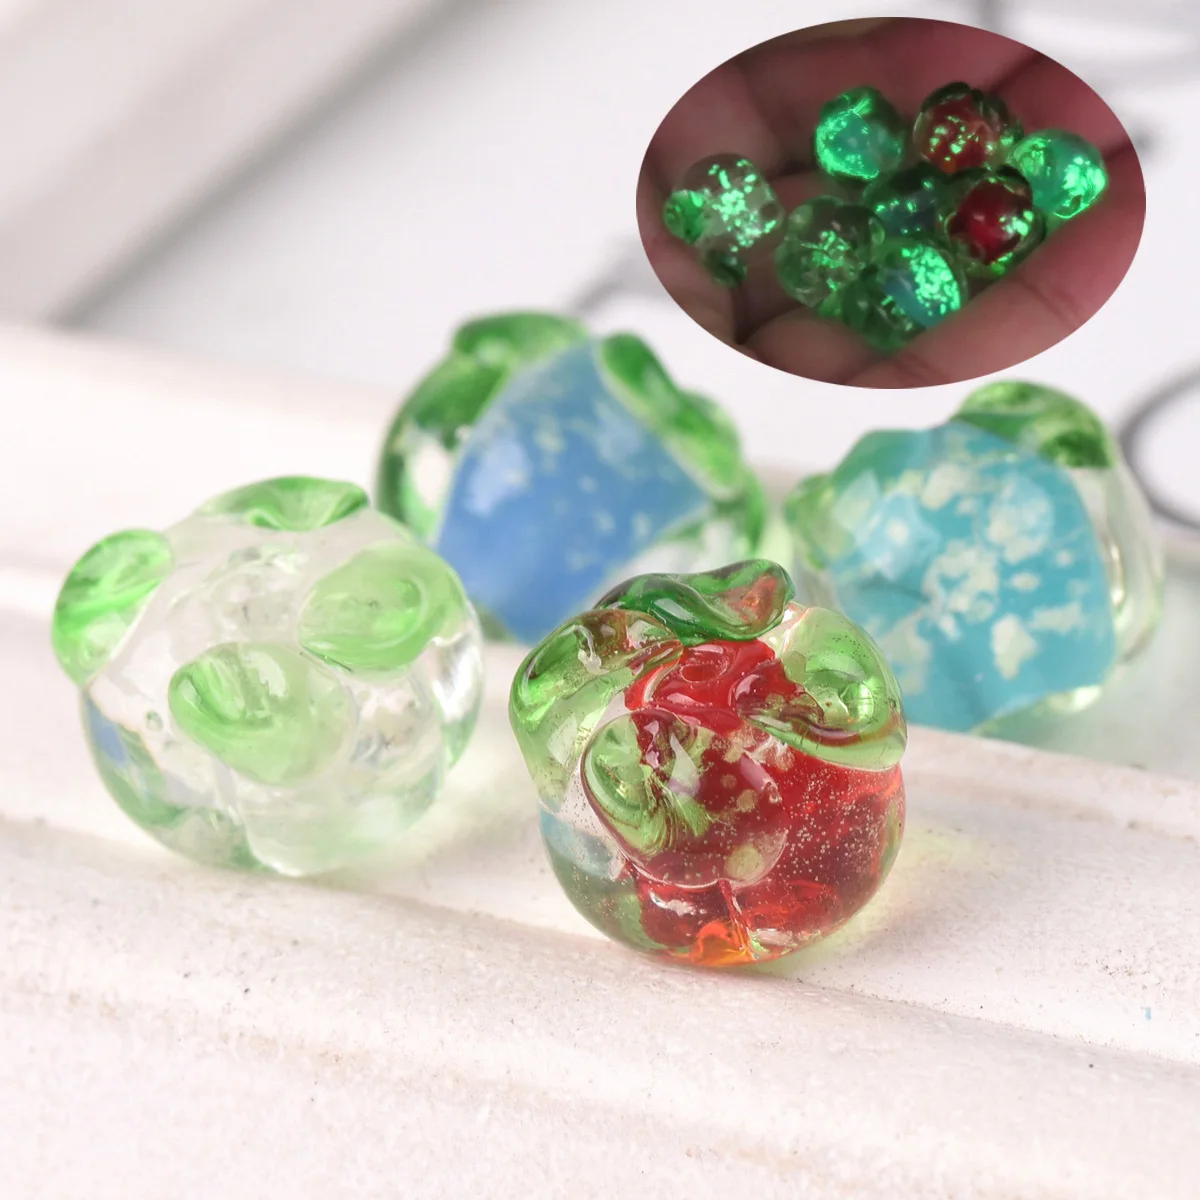 5pcs 12mm Round Luminous Persimmon Shape Handmade Lampwork Glass Loose Beads for Jewelry Making DIY Crafts Findings